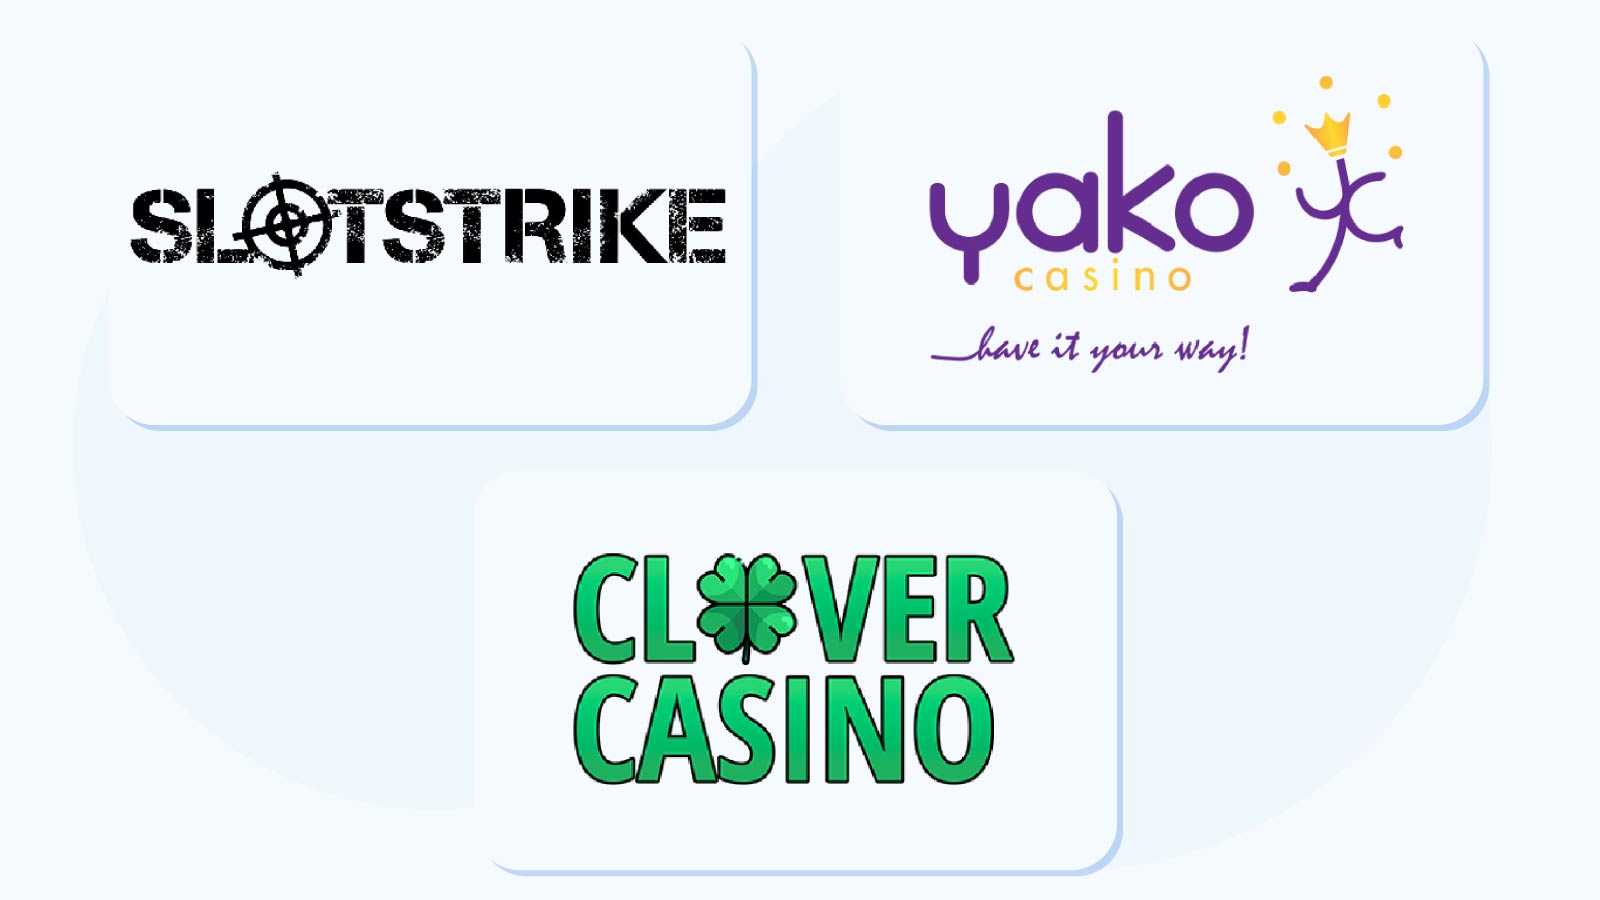 Recommended Mobile Boku Casinos